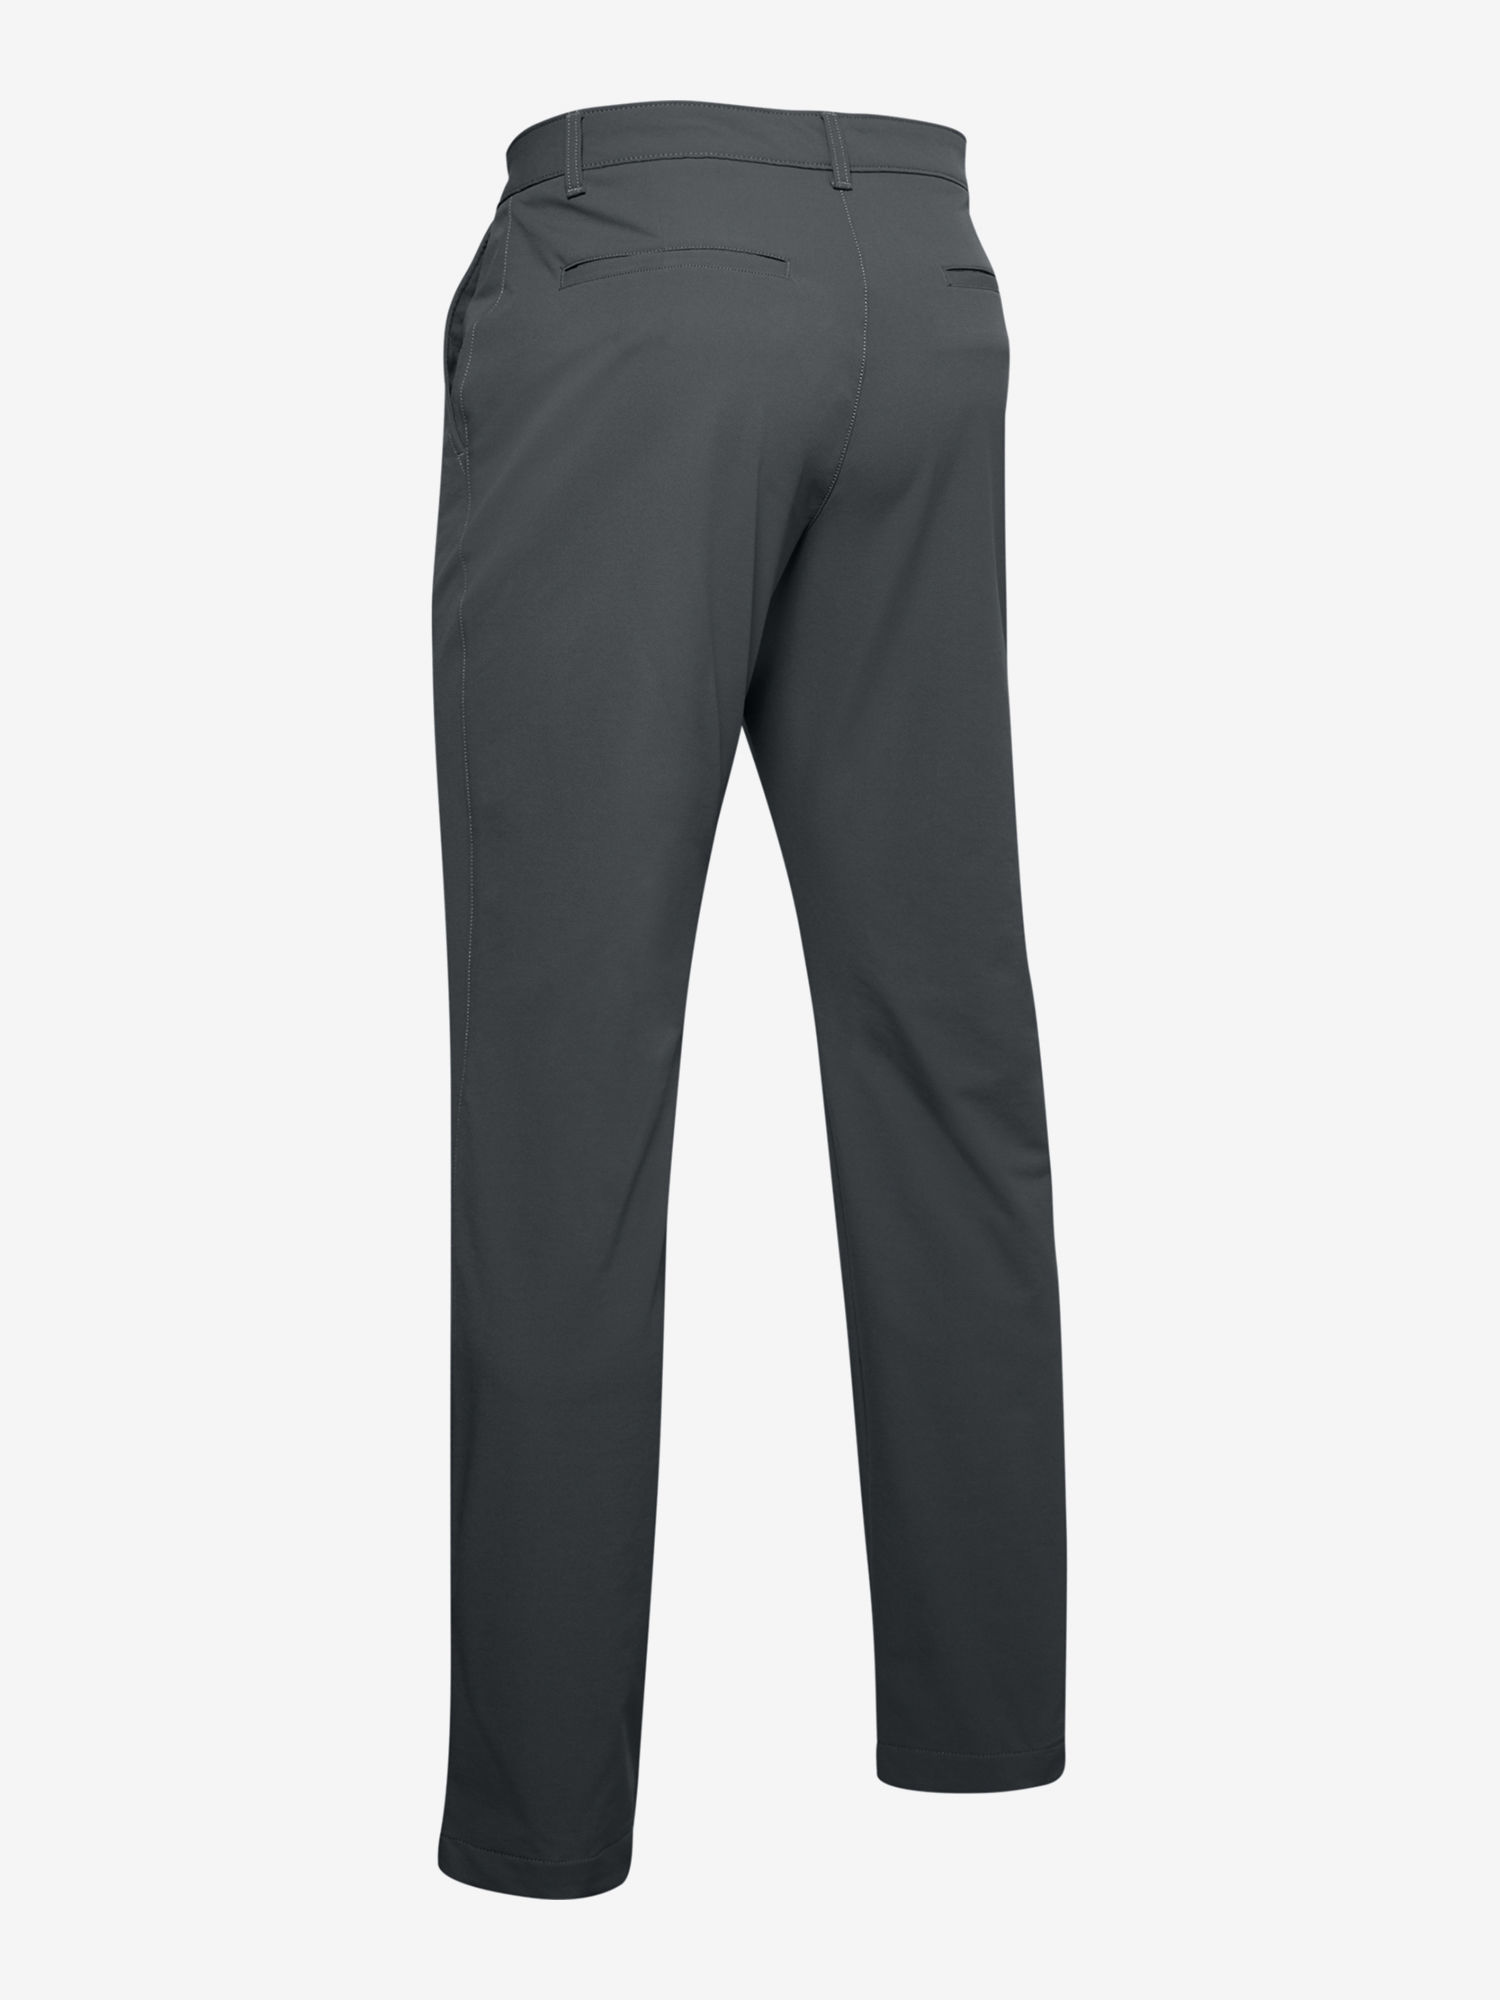 Kalhoty Under Armour Tech Pant-GRY (5)